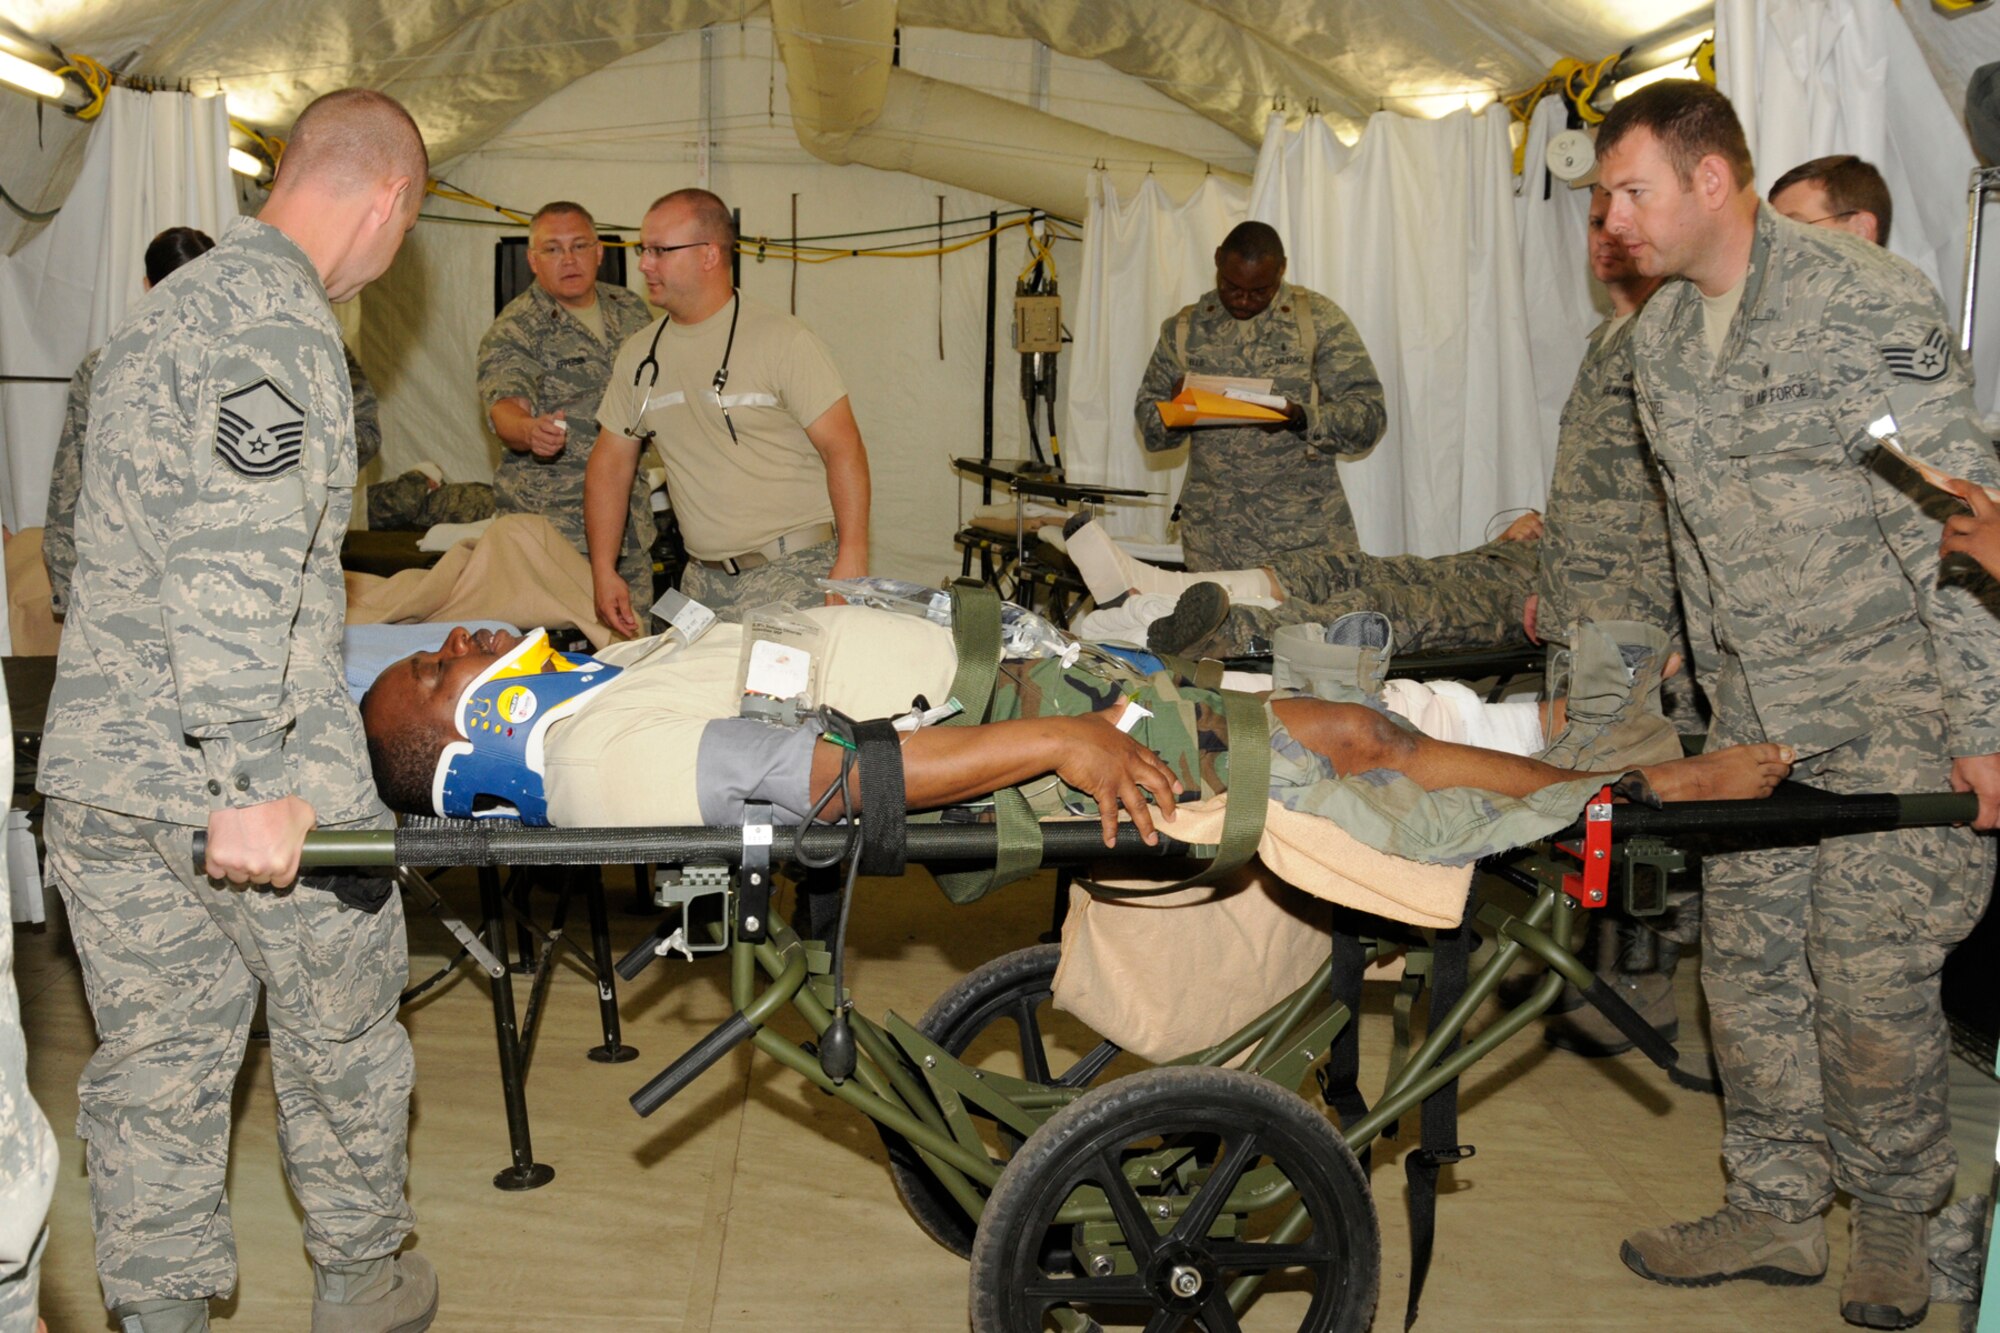 Medical Airmen transport an “injured” Technical Sgt. Kenneth Glanzie into the emergency room during a training exercise at the Alpena Combat Readiness Training Center, Mich., May 24, 2012. During the Emergency Medical Training exercise, medical specialists from eight medical groups in seven states gathered to practice responding to a natural disaster. (U.S. Air Force photo by TSgt. David Kujawa)